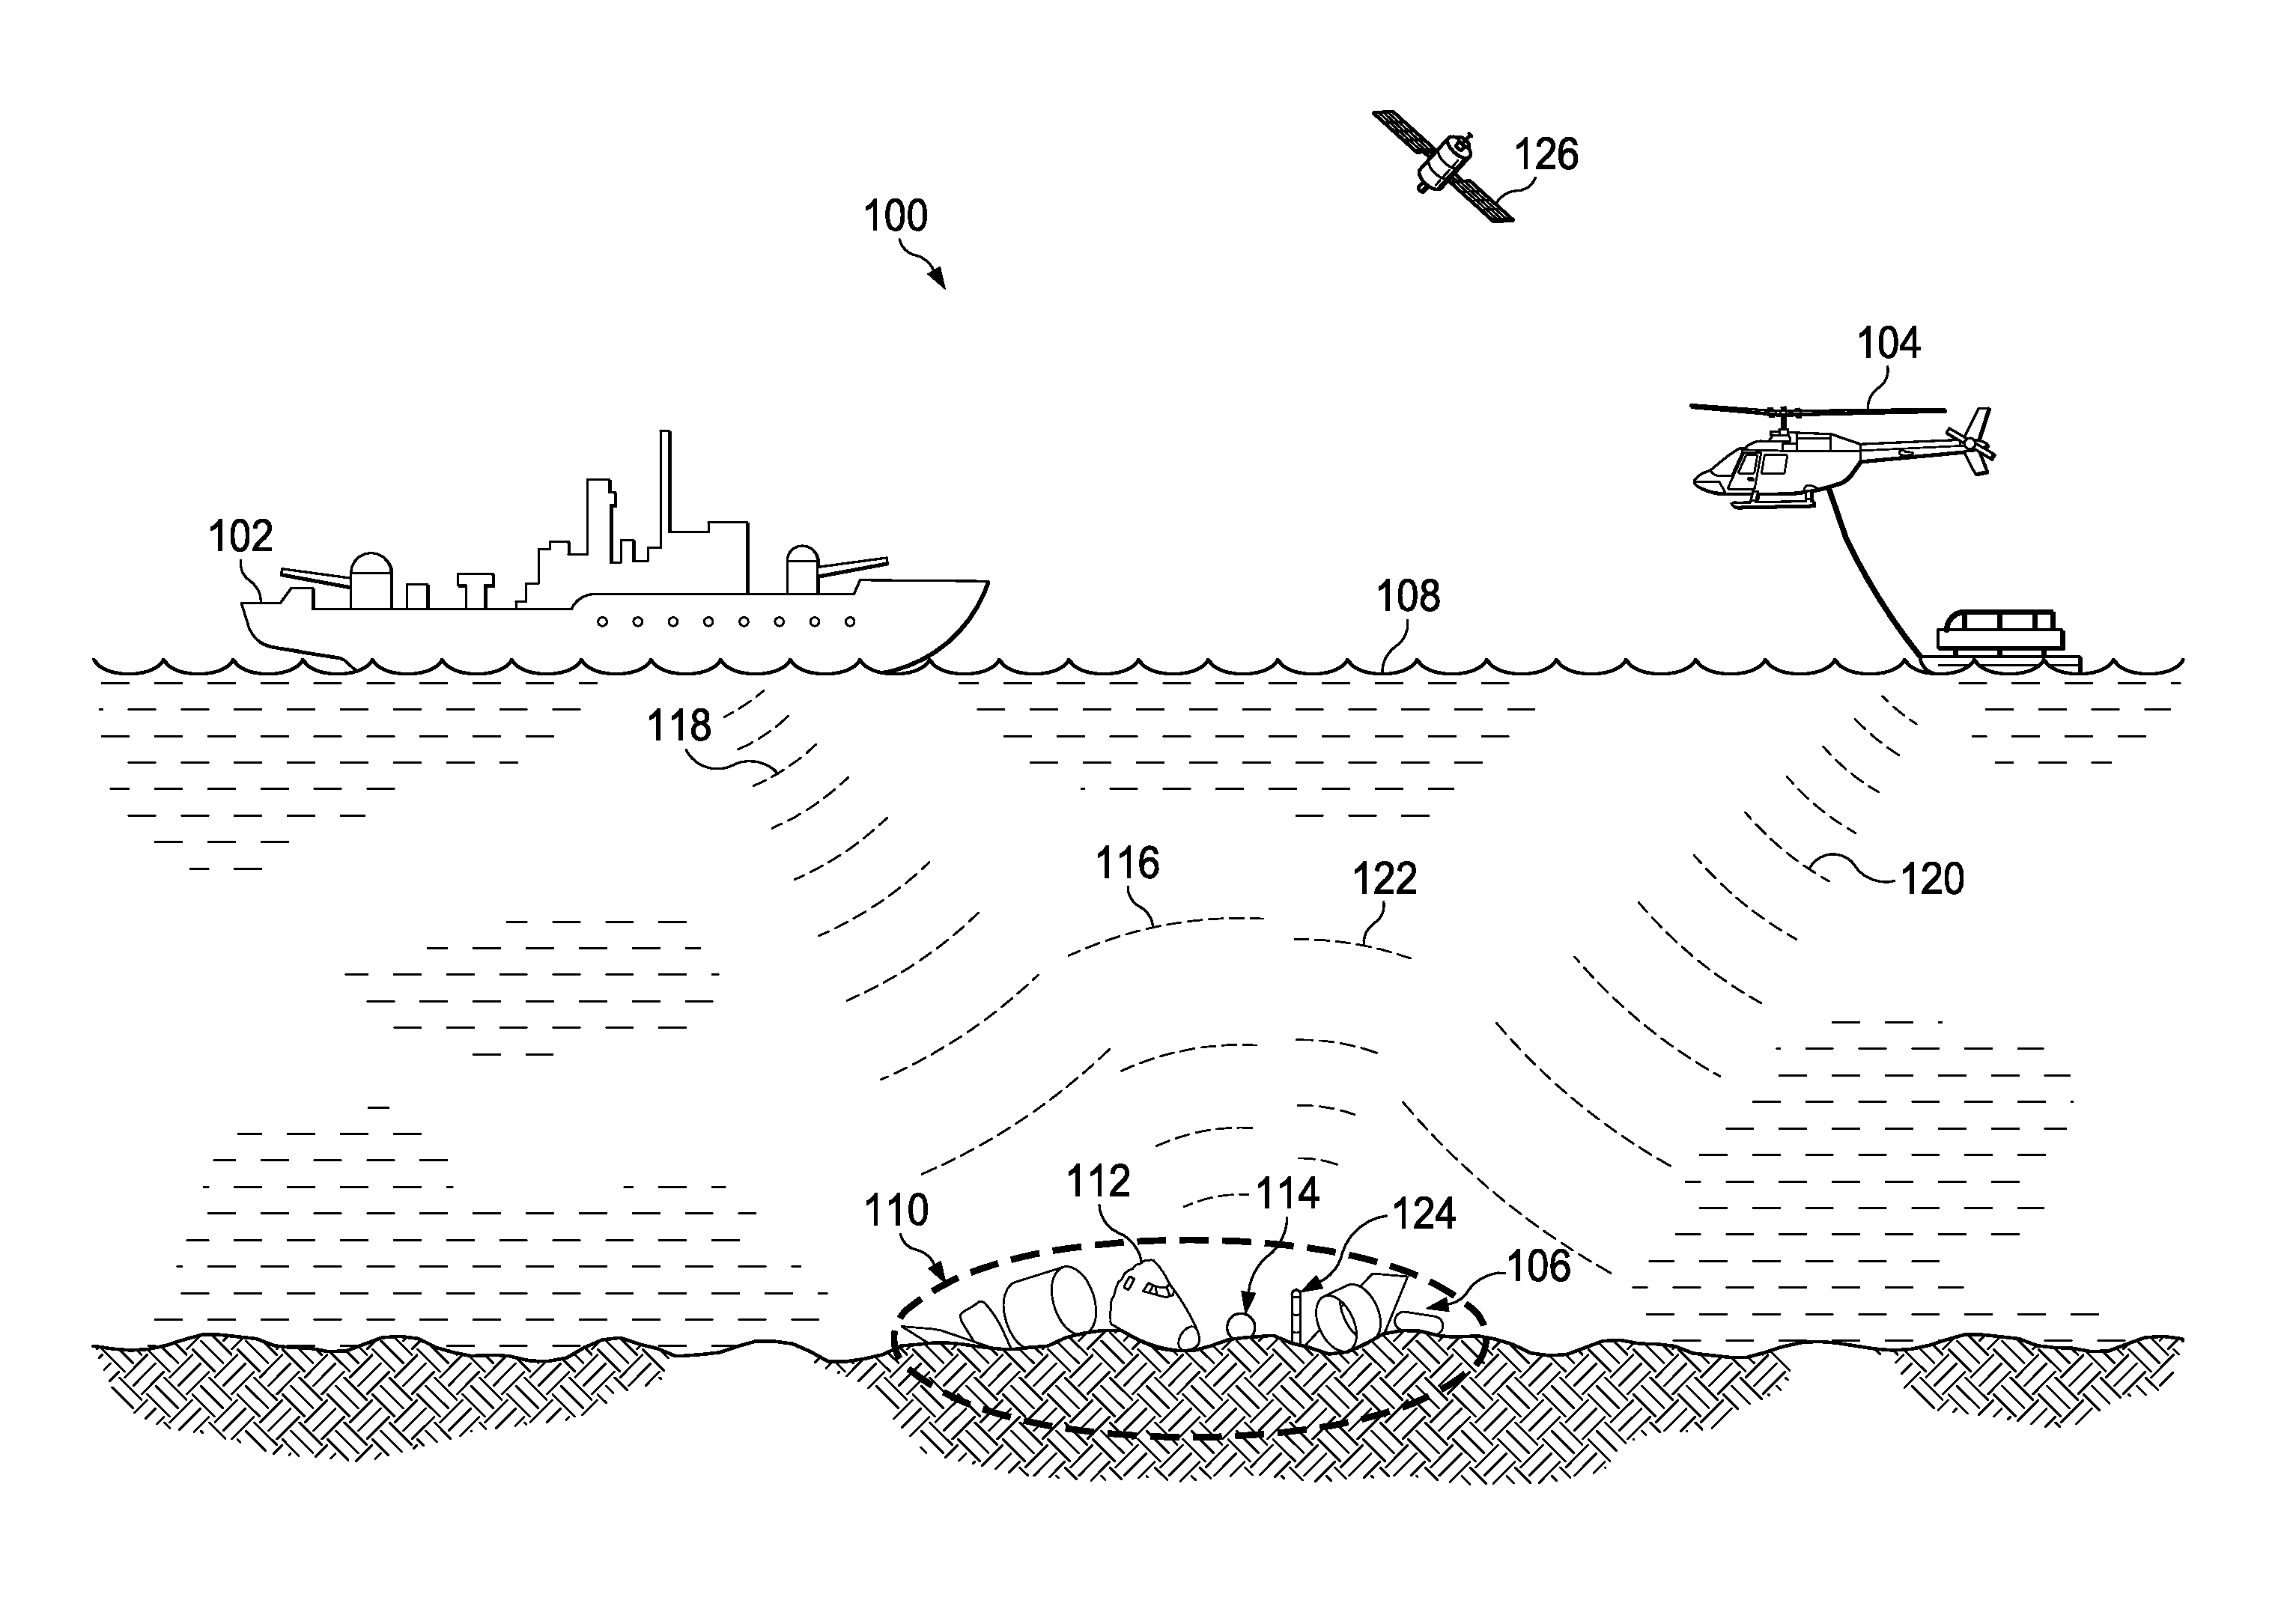 Aircraft Location System for Locating Aircraft in Water Environments